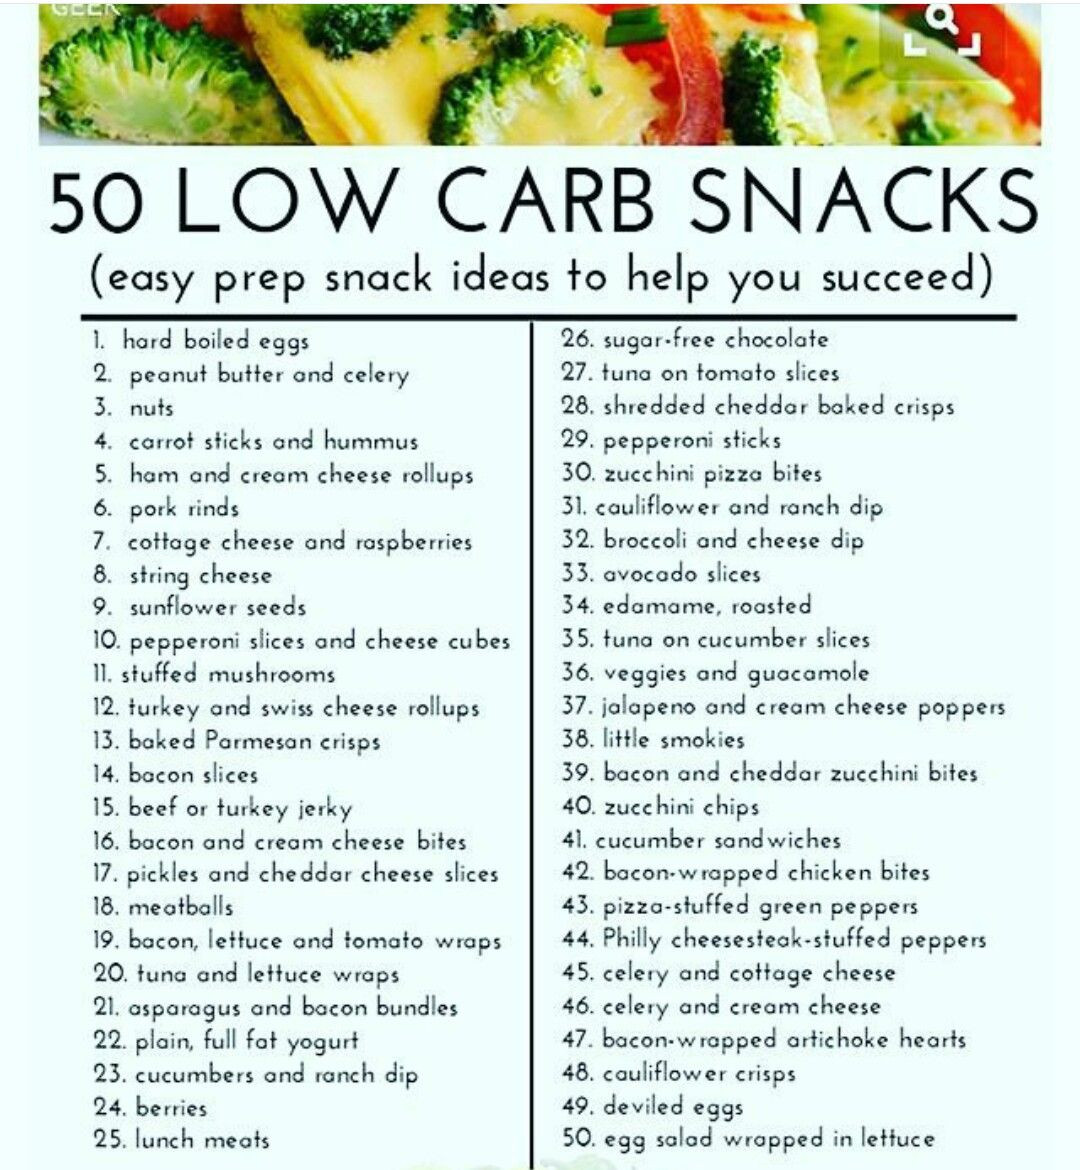 Low Carbohydrate Diet Snacks Ideas
 50 Low Carb Snack Ideas for When You Get the Munchies